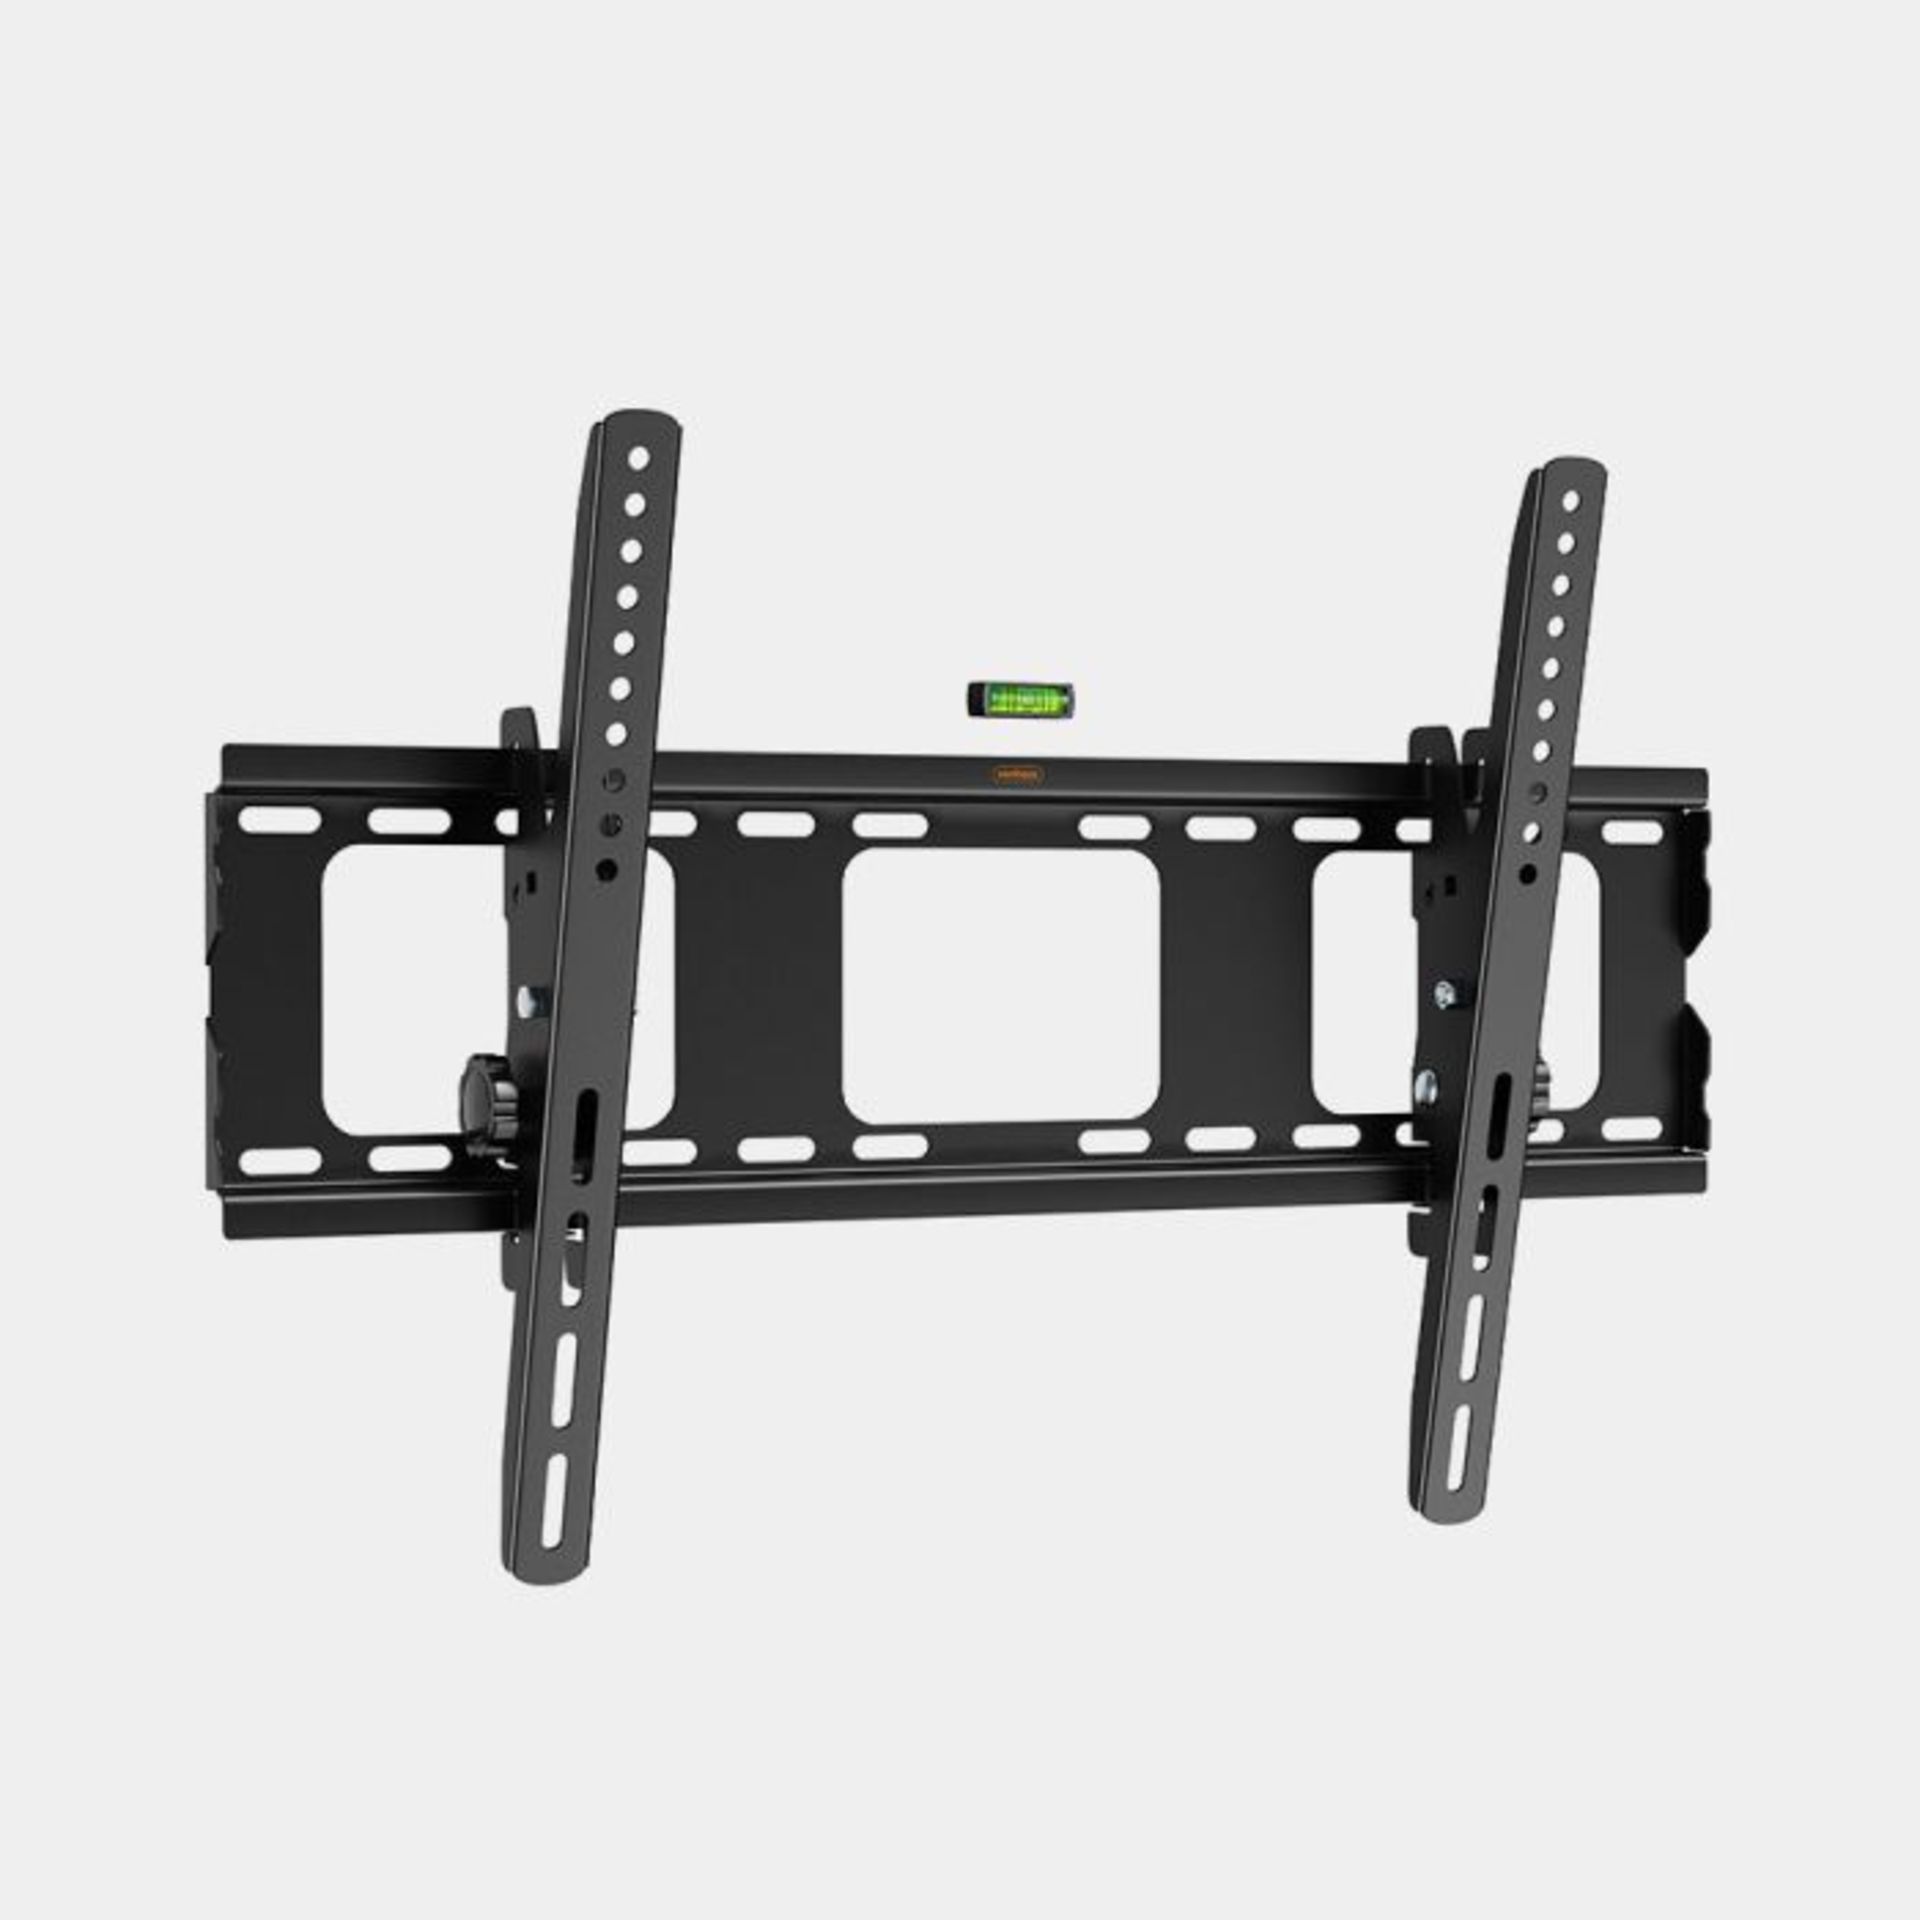 (9/258)3 x 32-70 inch Tilt TV Bracket. - PW. Transform your TV viewing experience with this sleek,